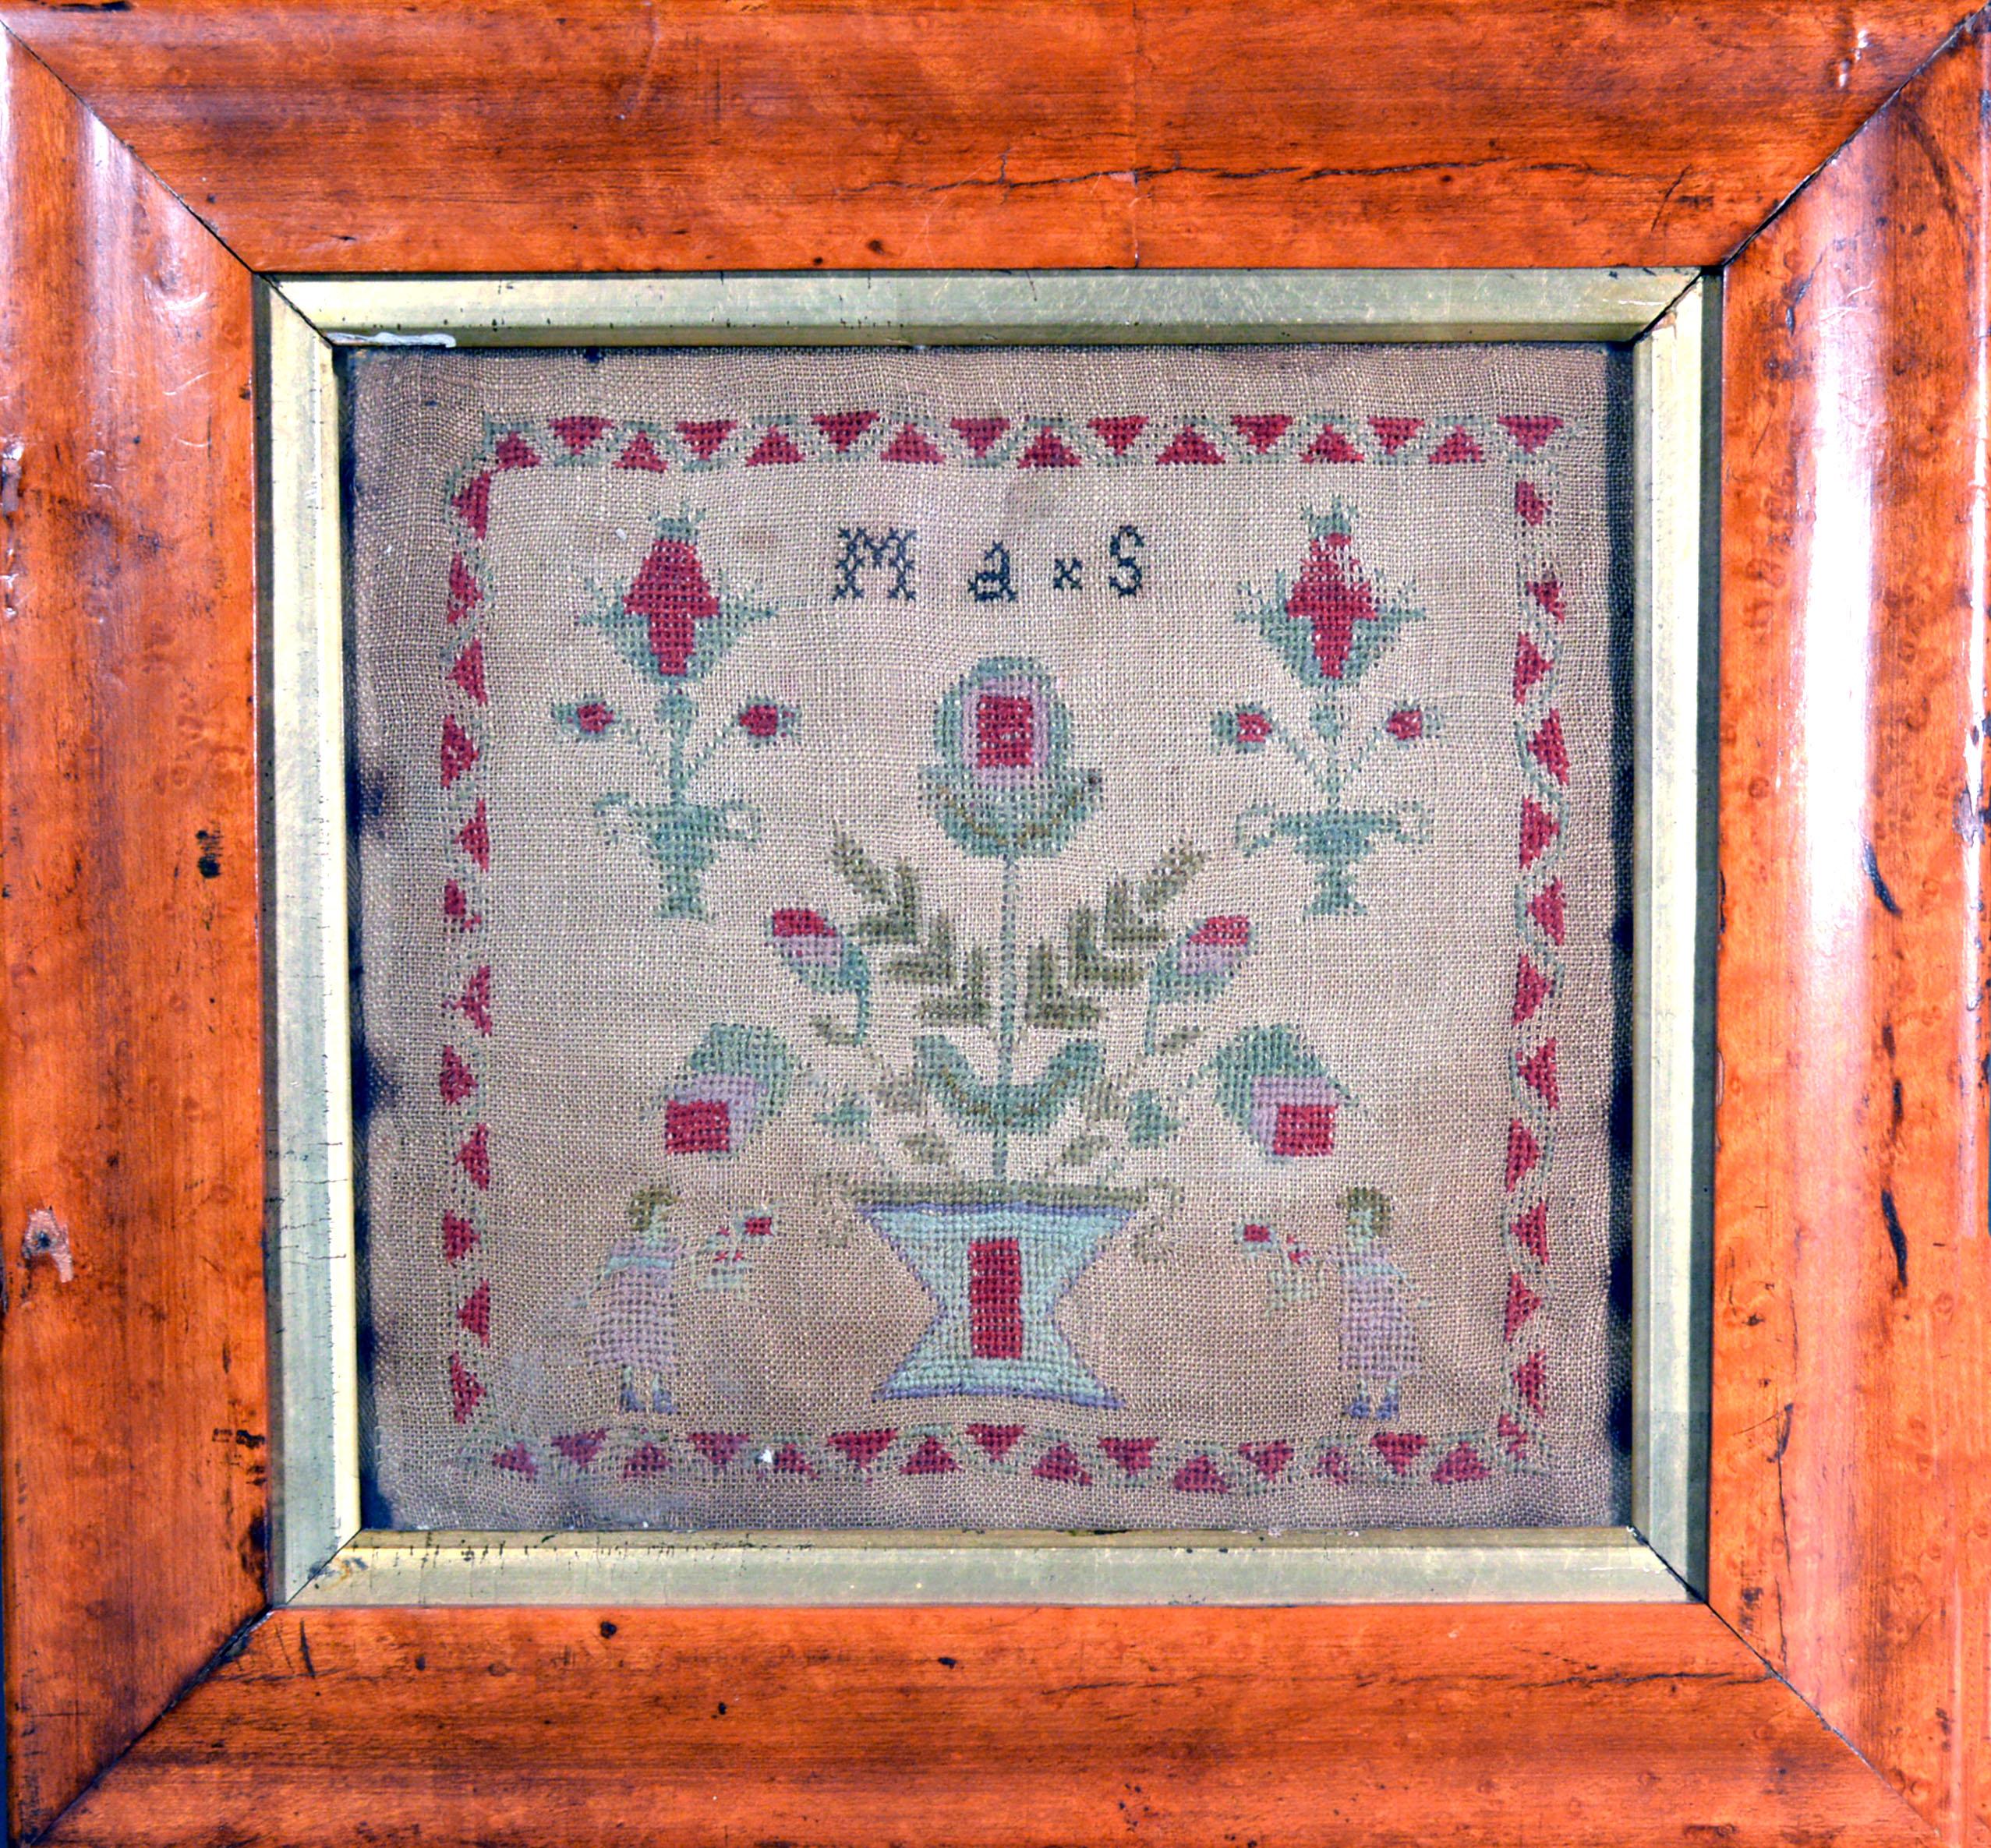 Pair of English needlework pictures, circa 1830

Both of the linen needlework by the same hand.

On one are the initials 